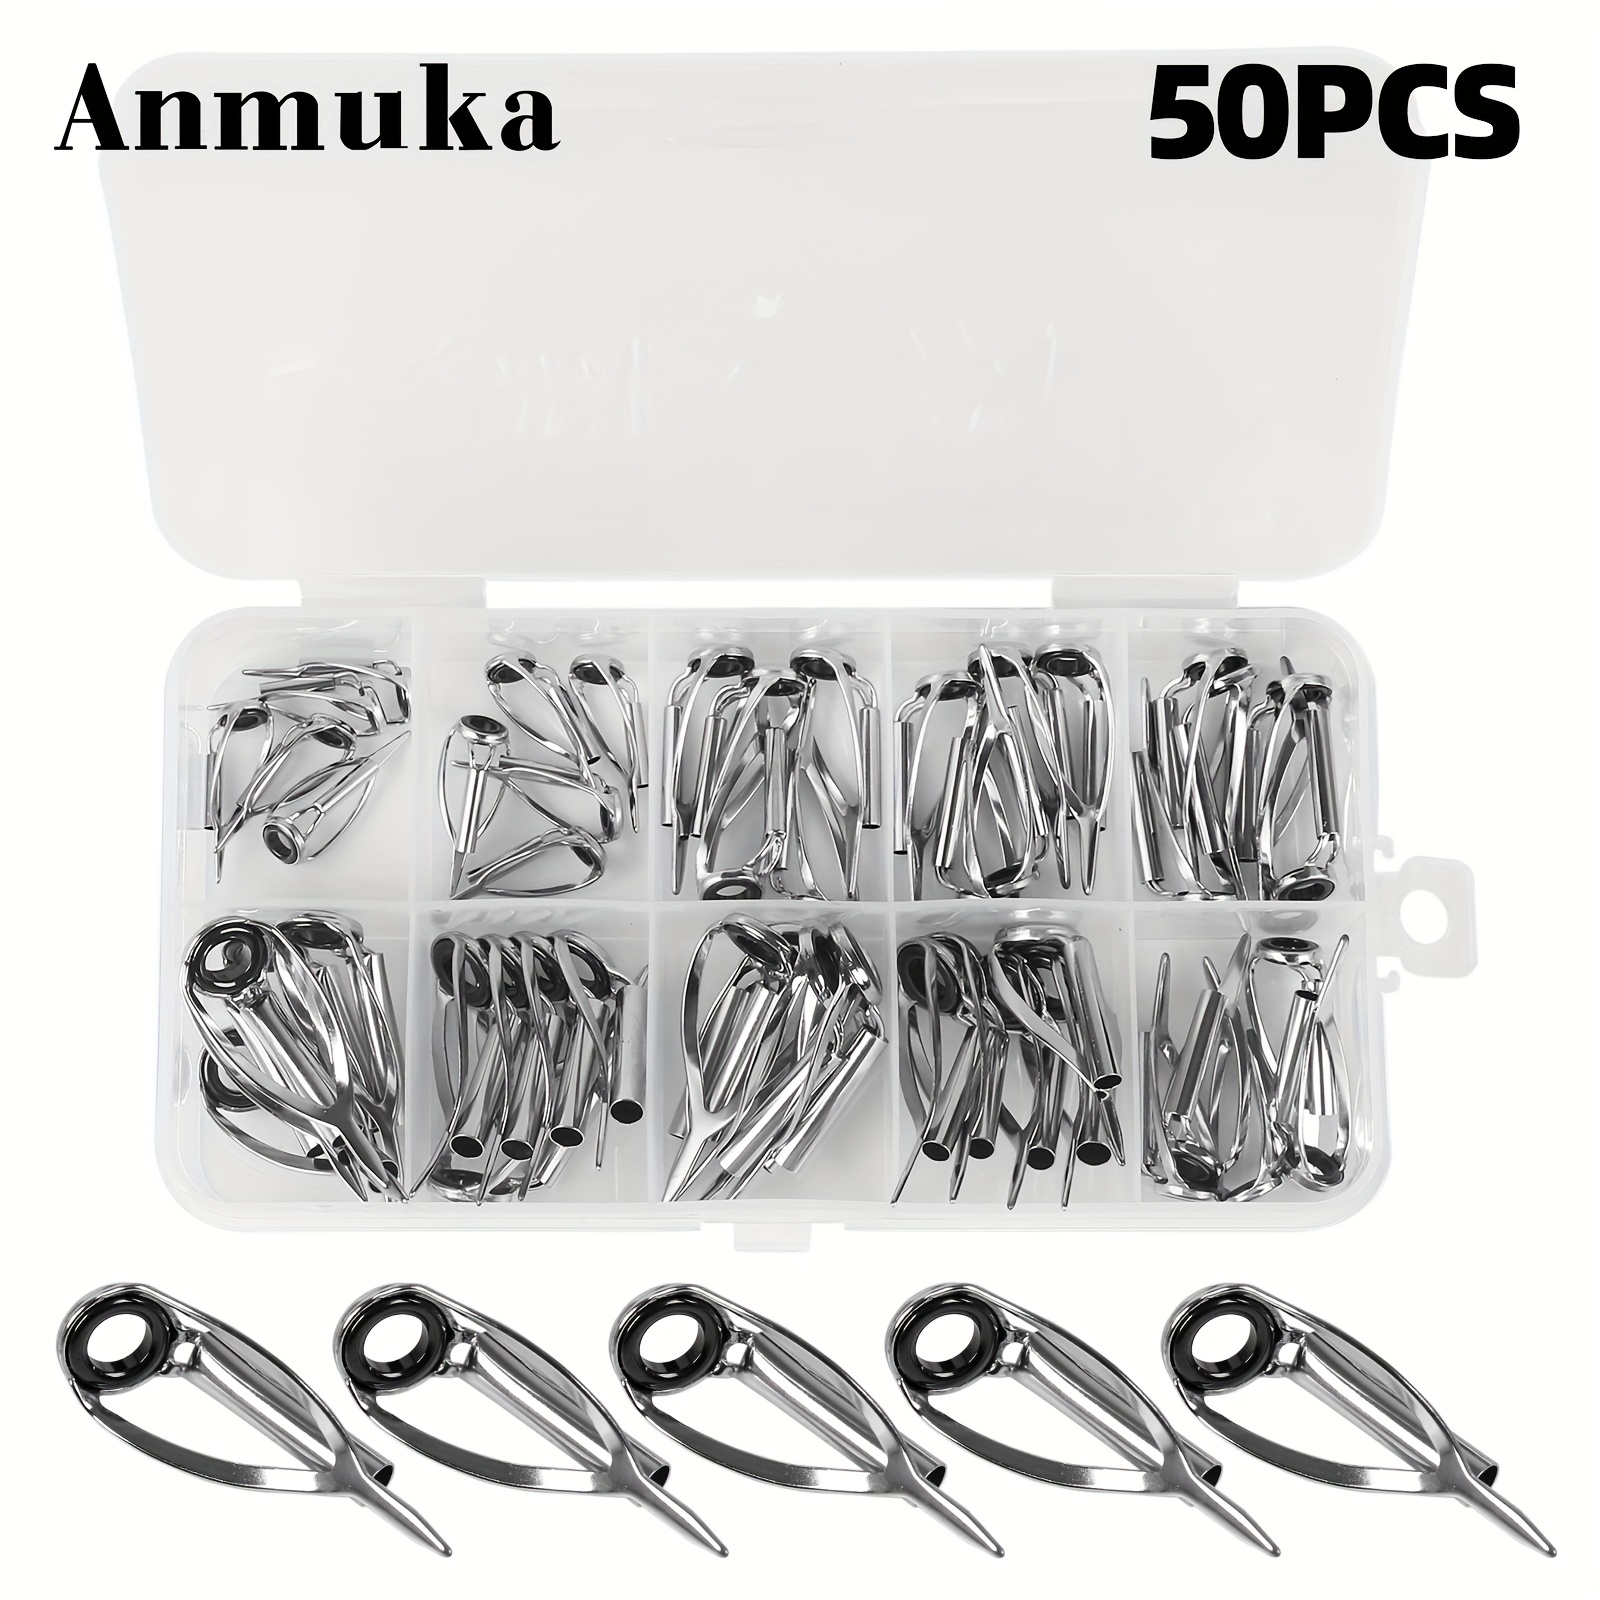 50pcs Durable Fishing Rod Tip Top Guide for Enhanced Fishing Experience